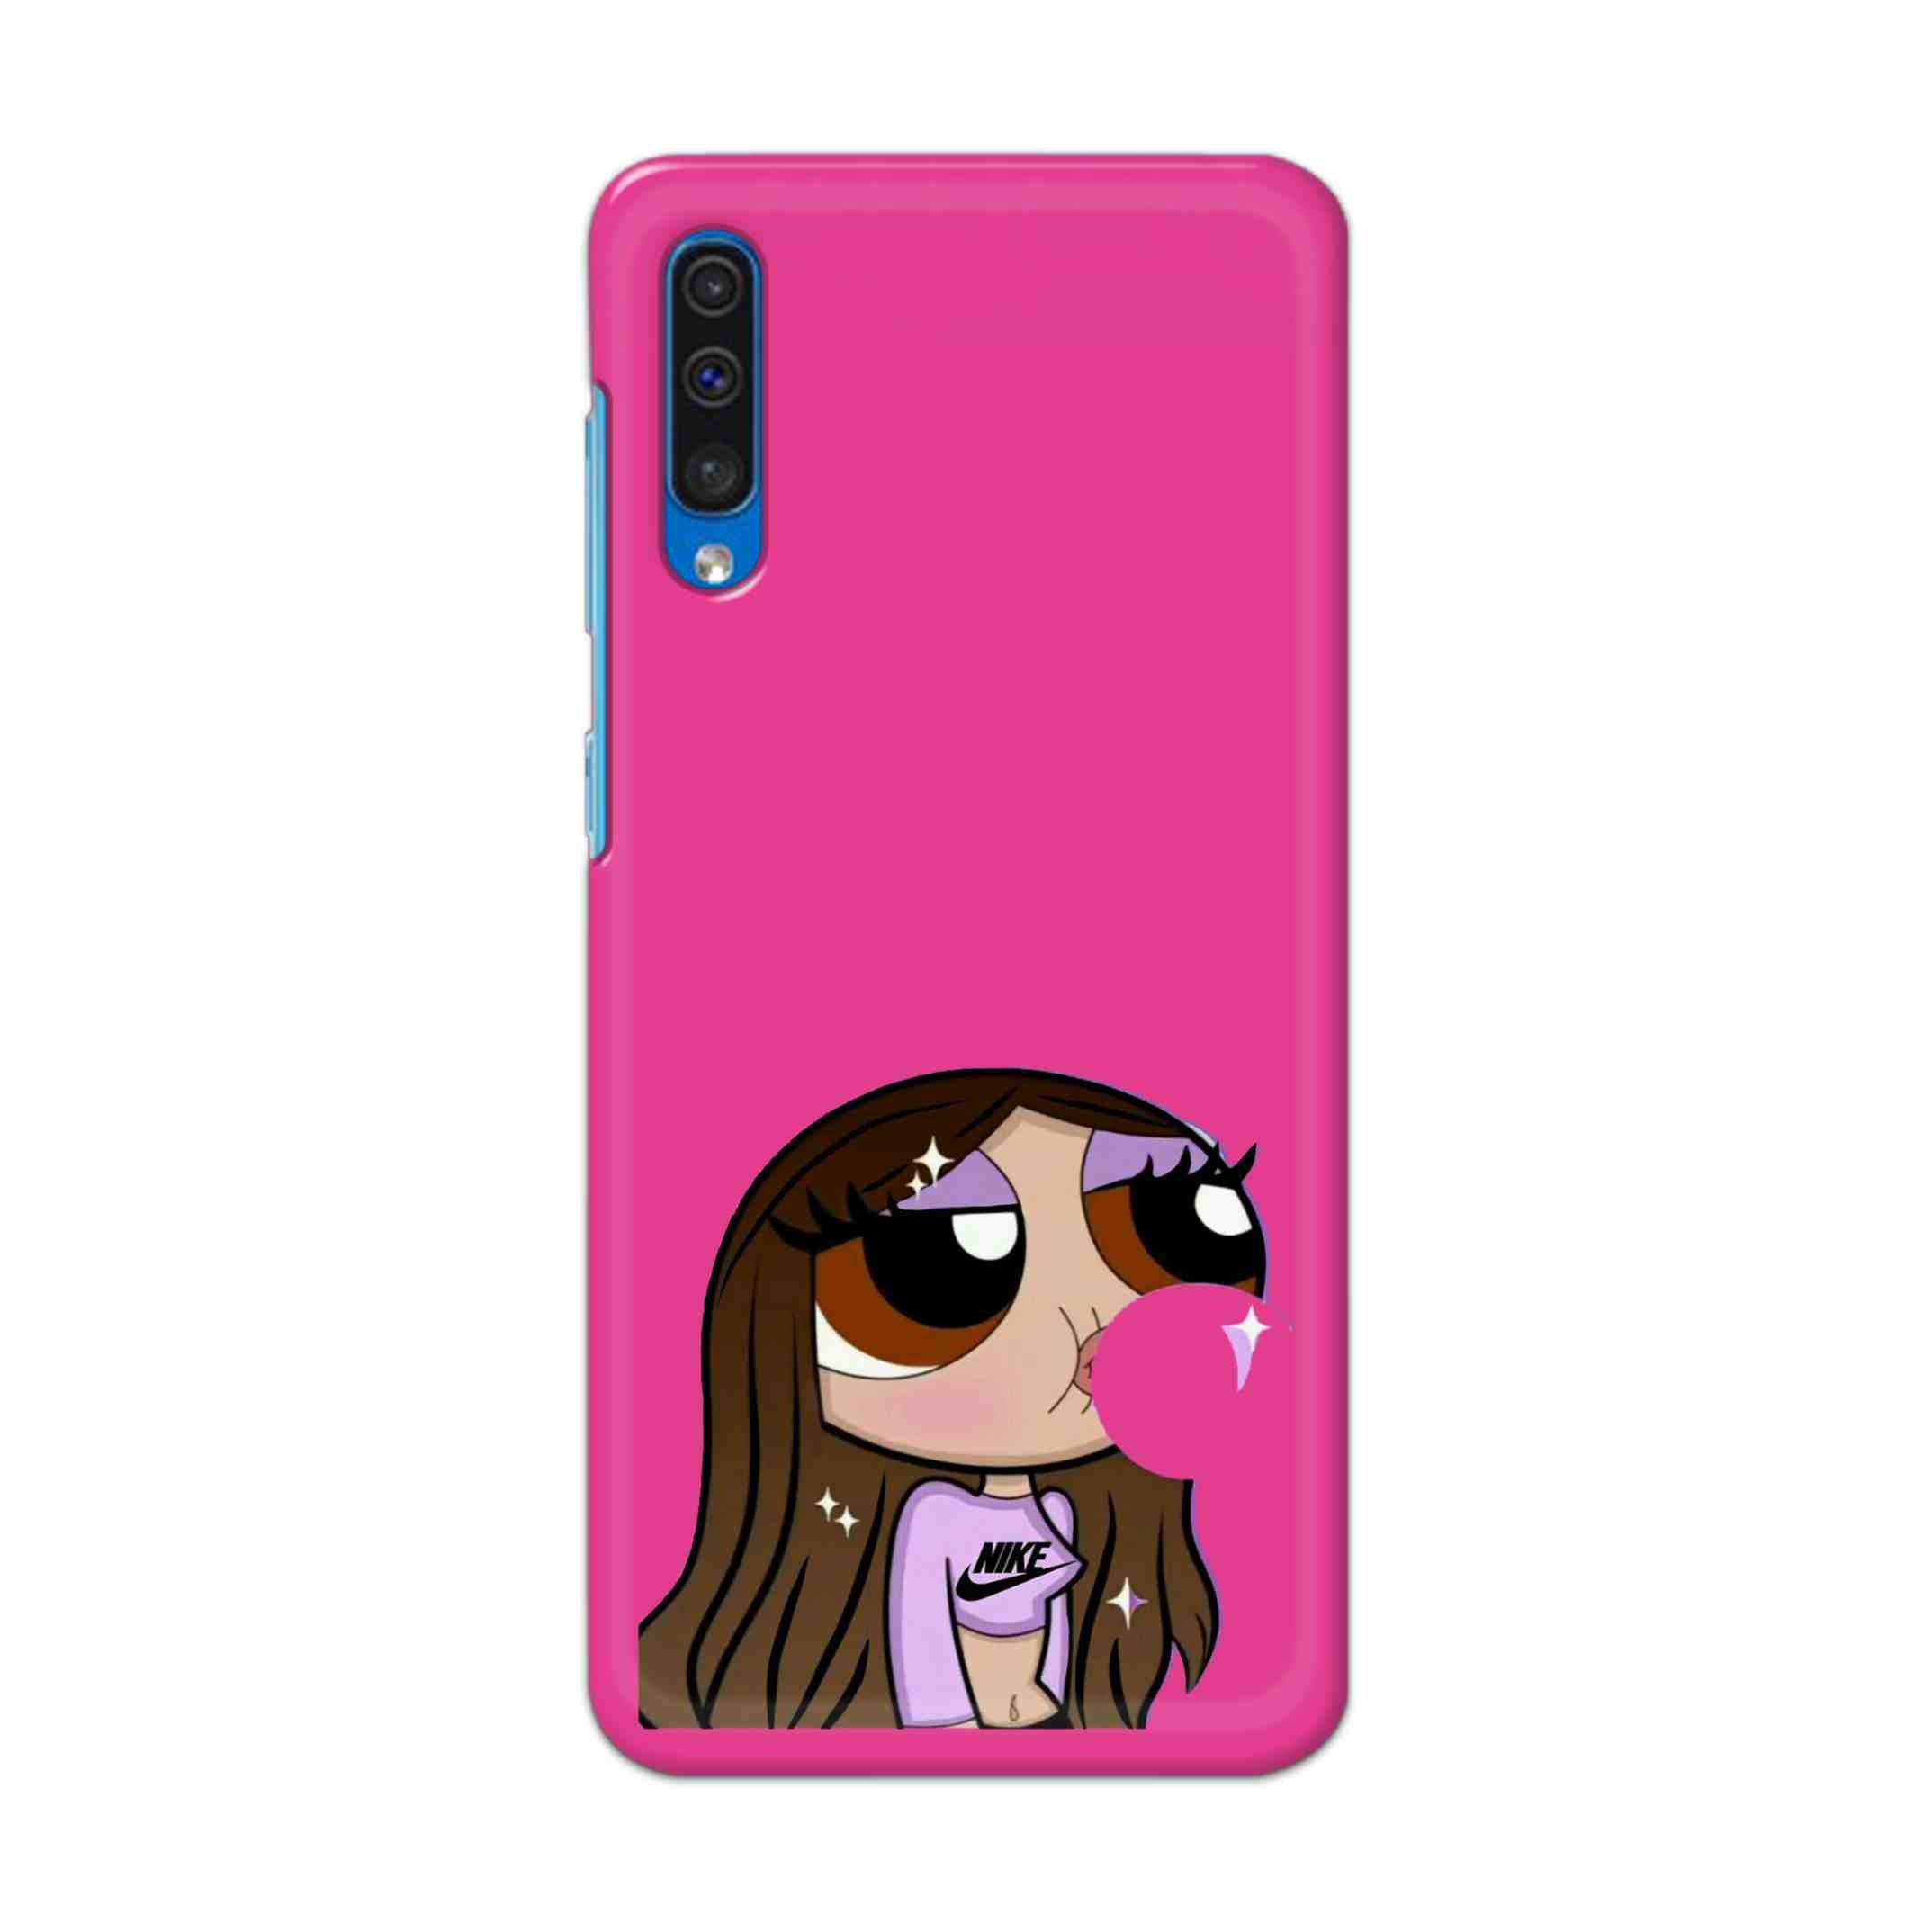 Buy Bubble Girl Hard Back Mobile Phone Case Cover For Samsung Galaxy A50 / A50s / A30s Online